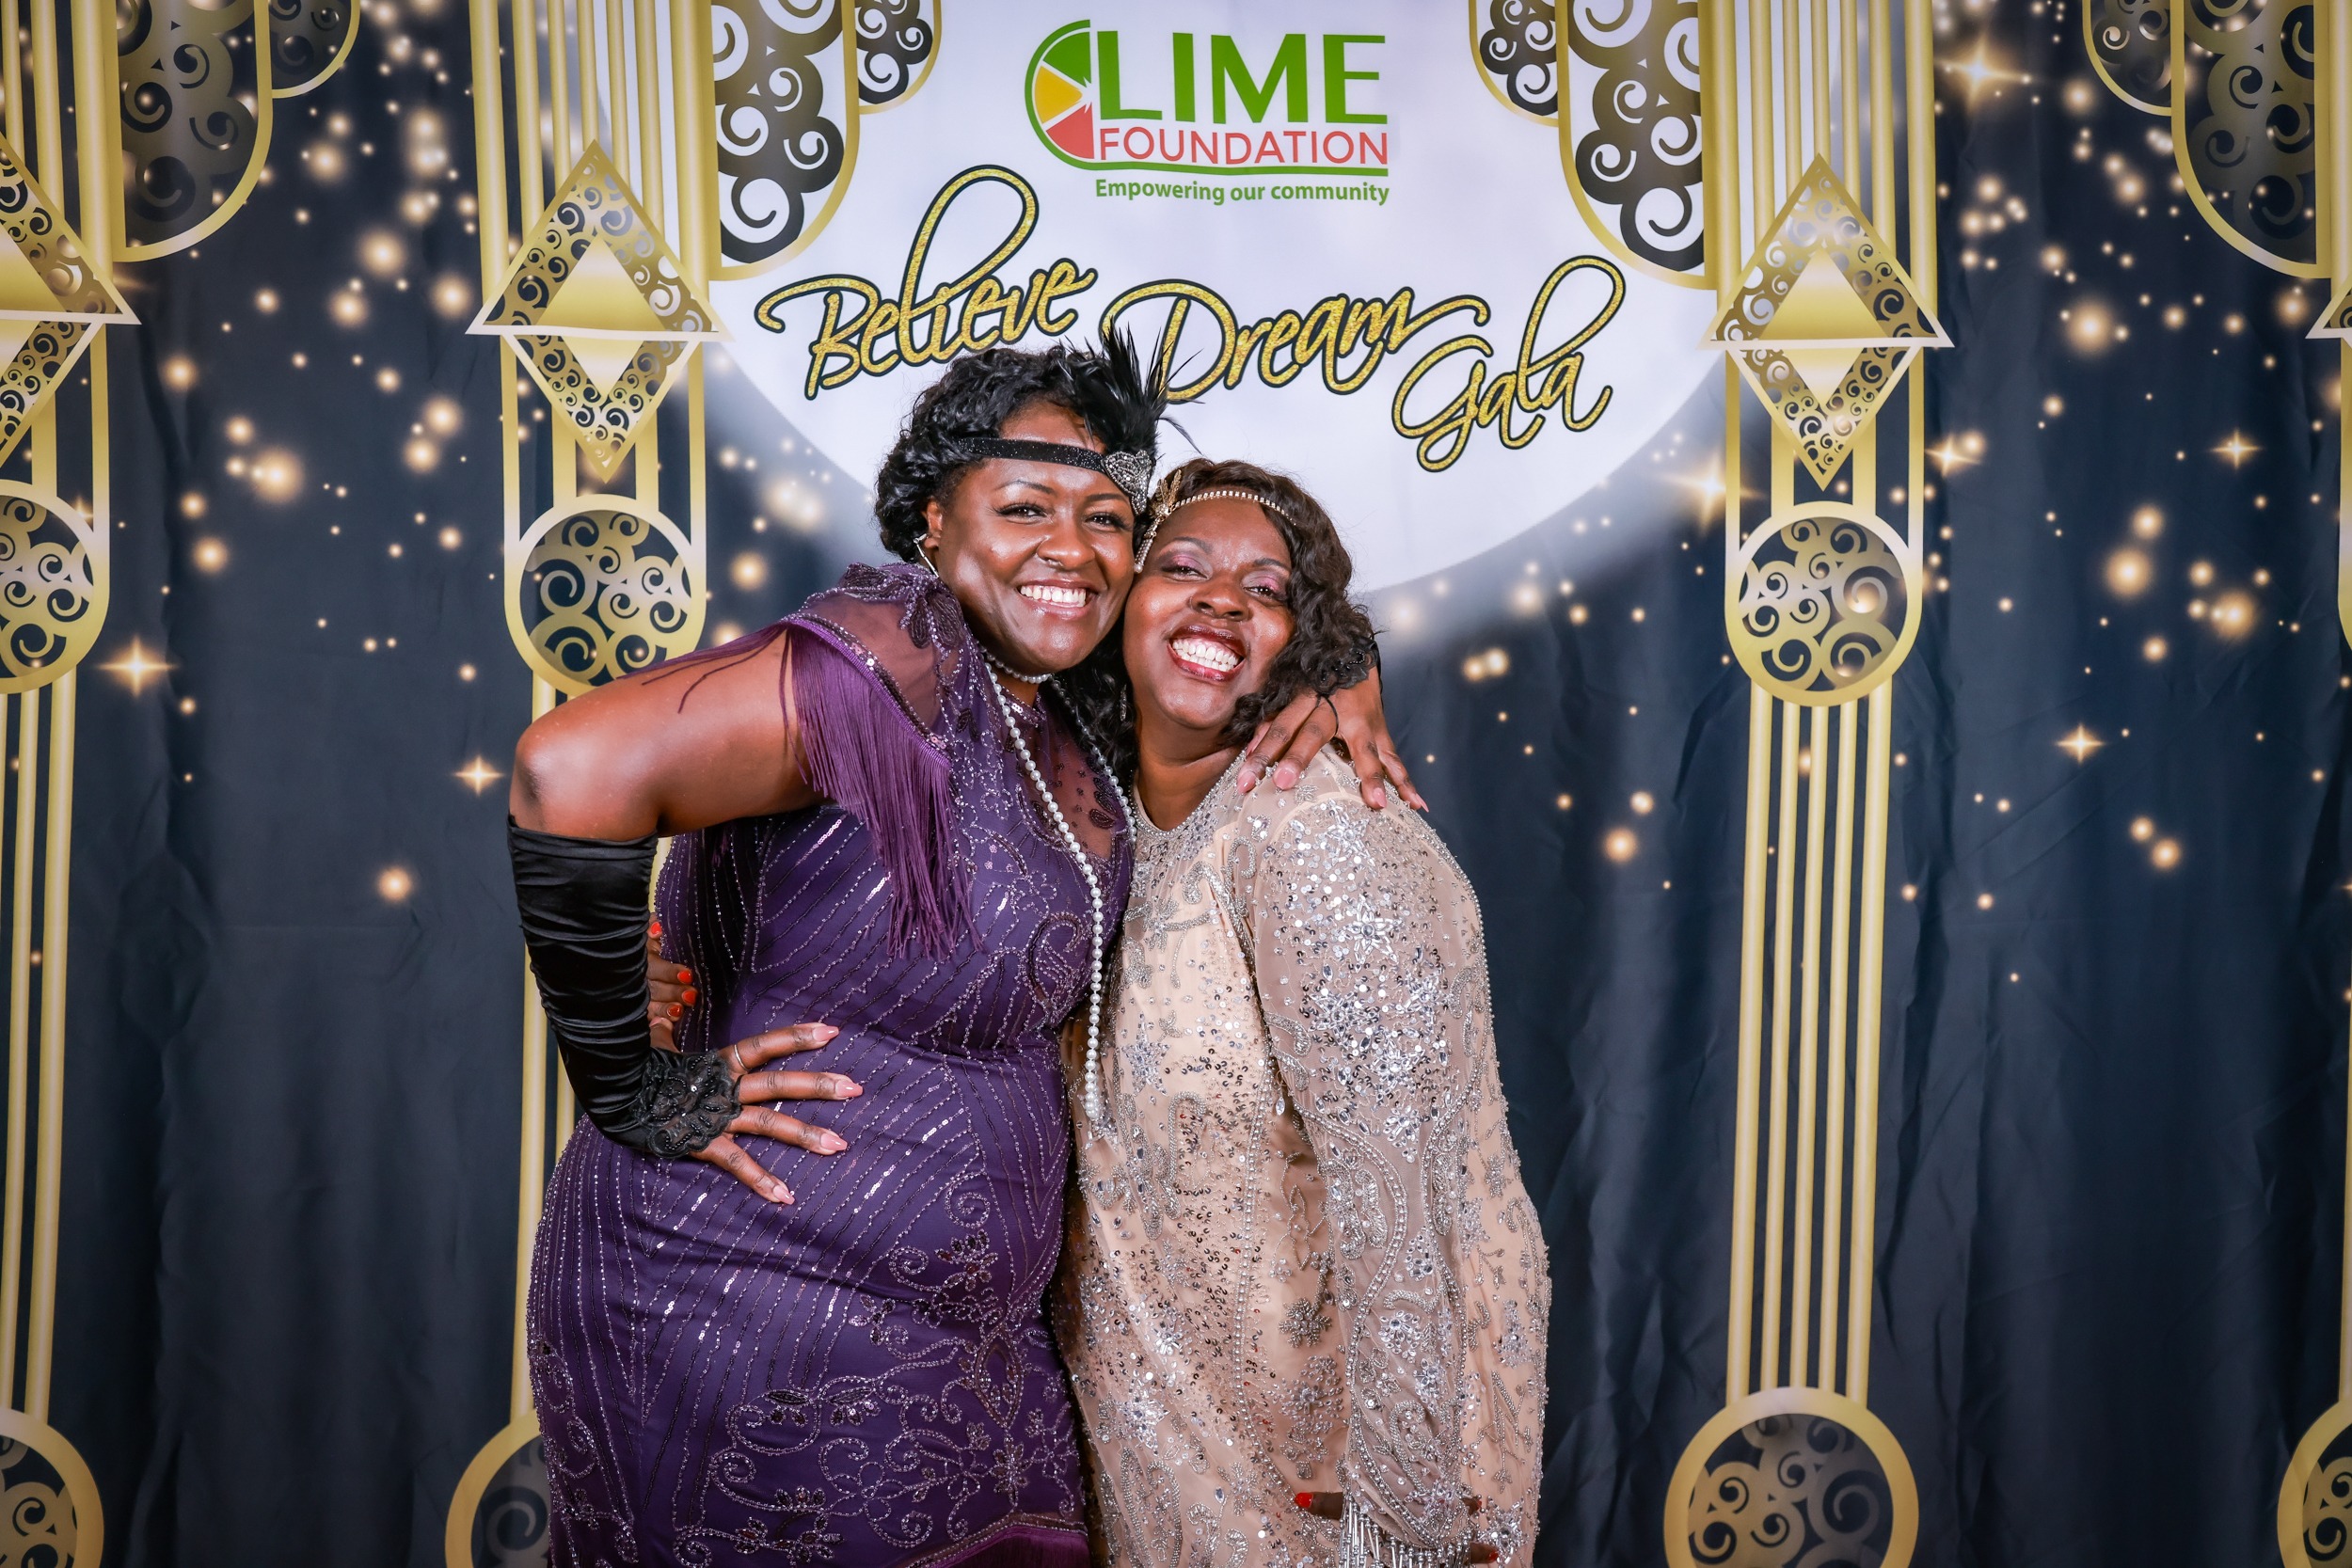 Two women posing for a photo at a 1920's themed party hosted by The LIME Foundation of Santa Rosa.